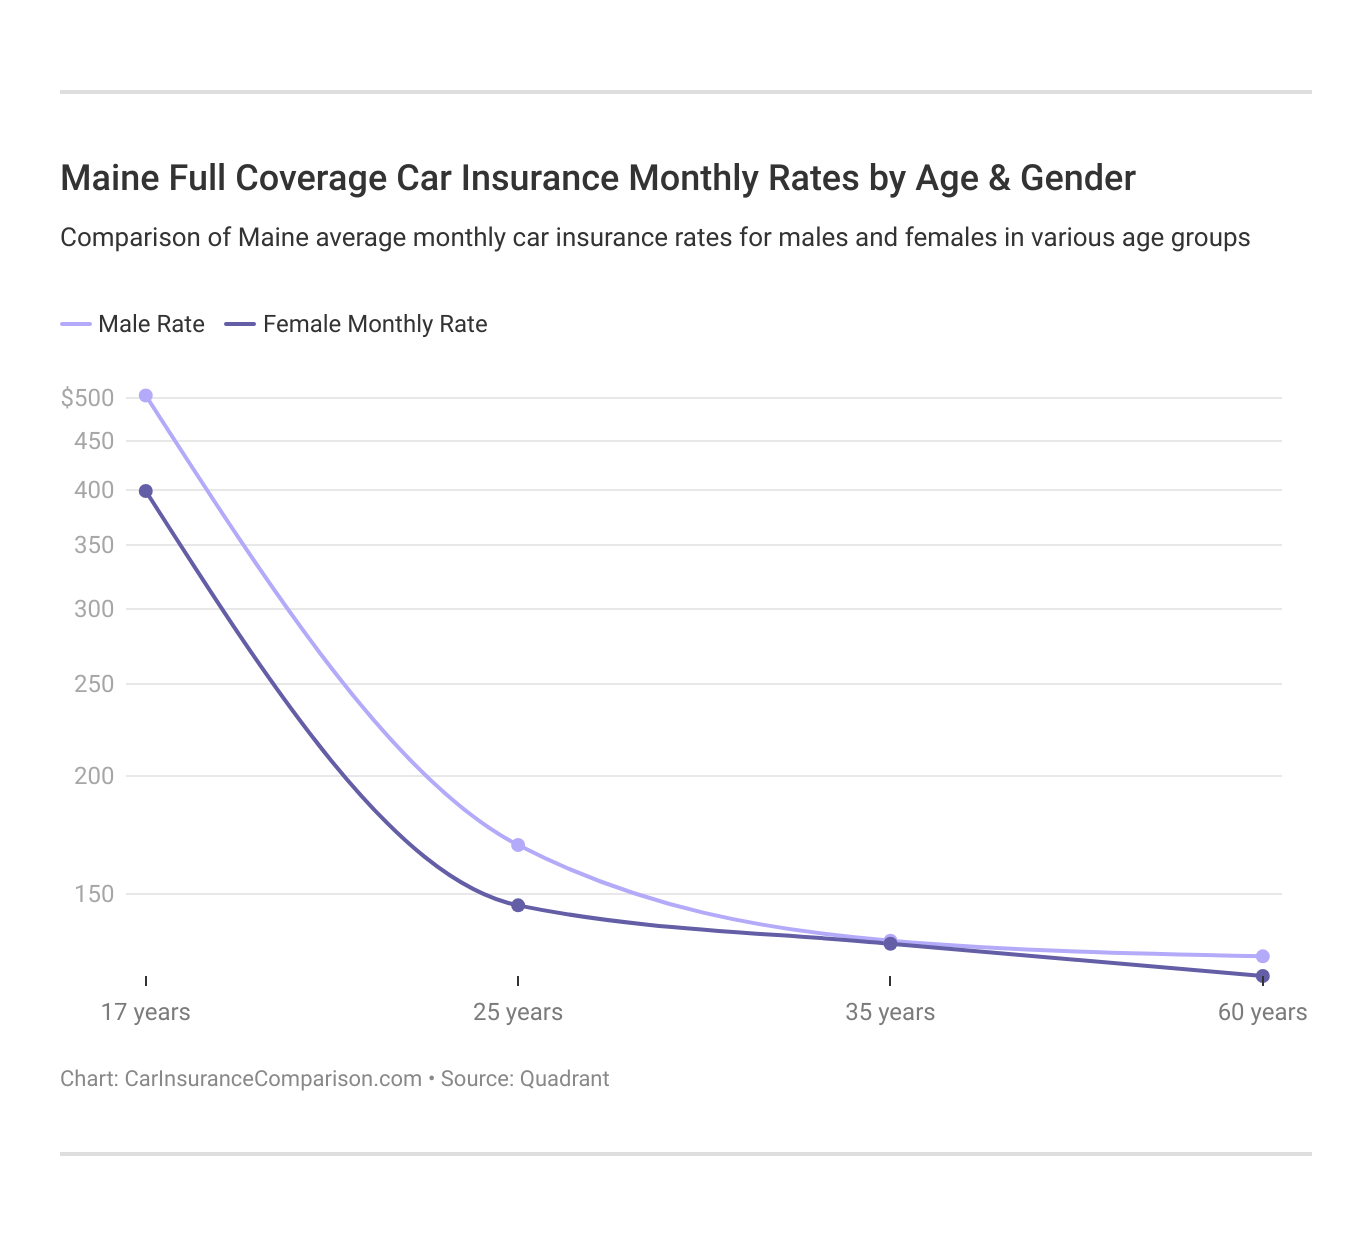 <h3>Maine Full Coverage Car Insurance Monthly Rates by Age & Gender</h3>